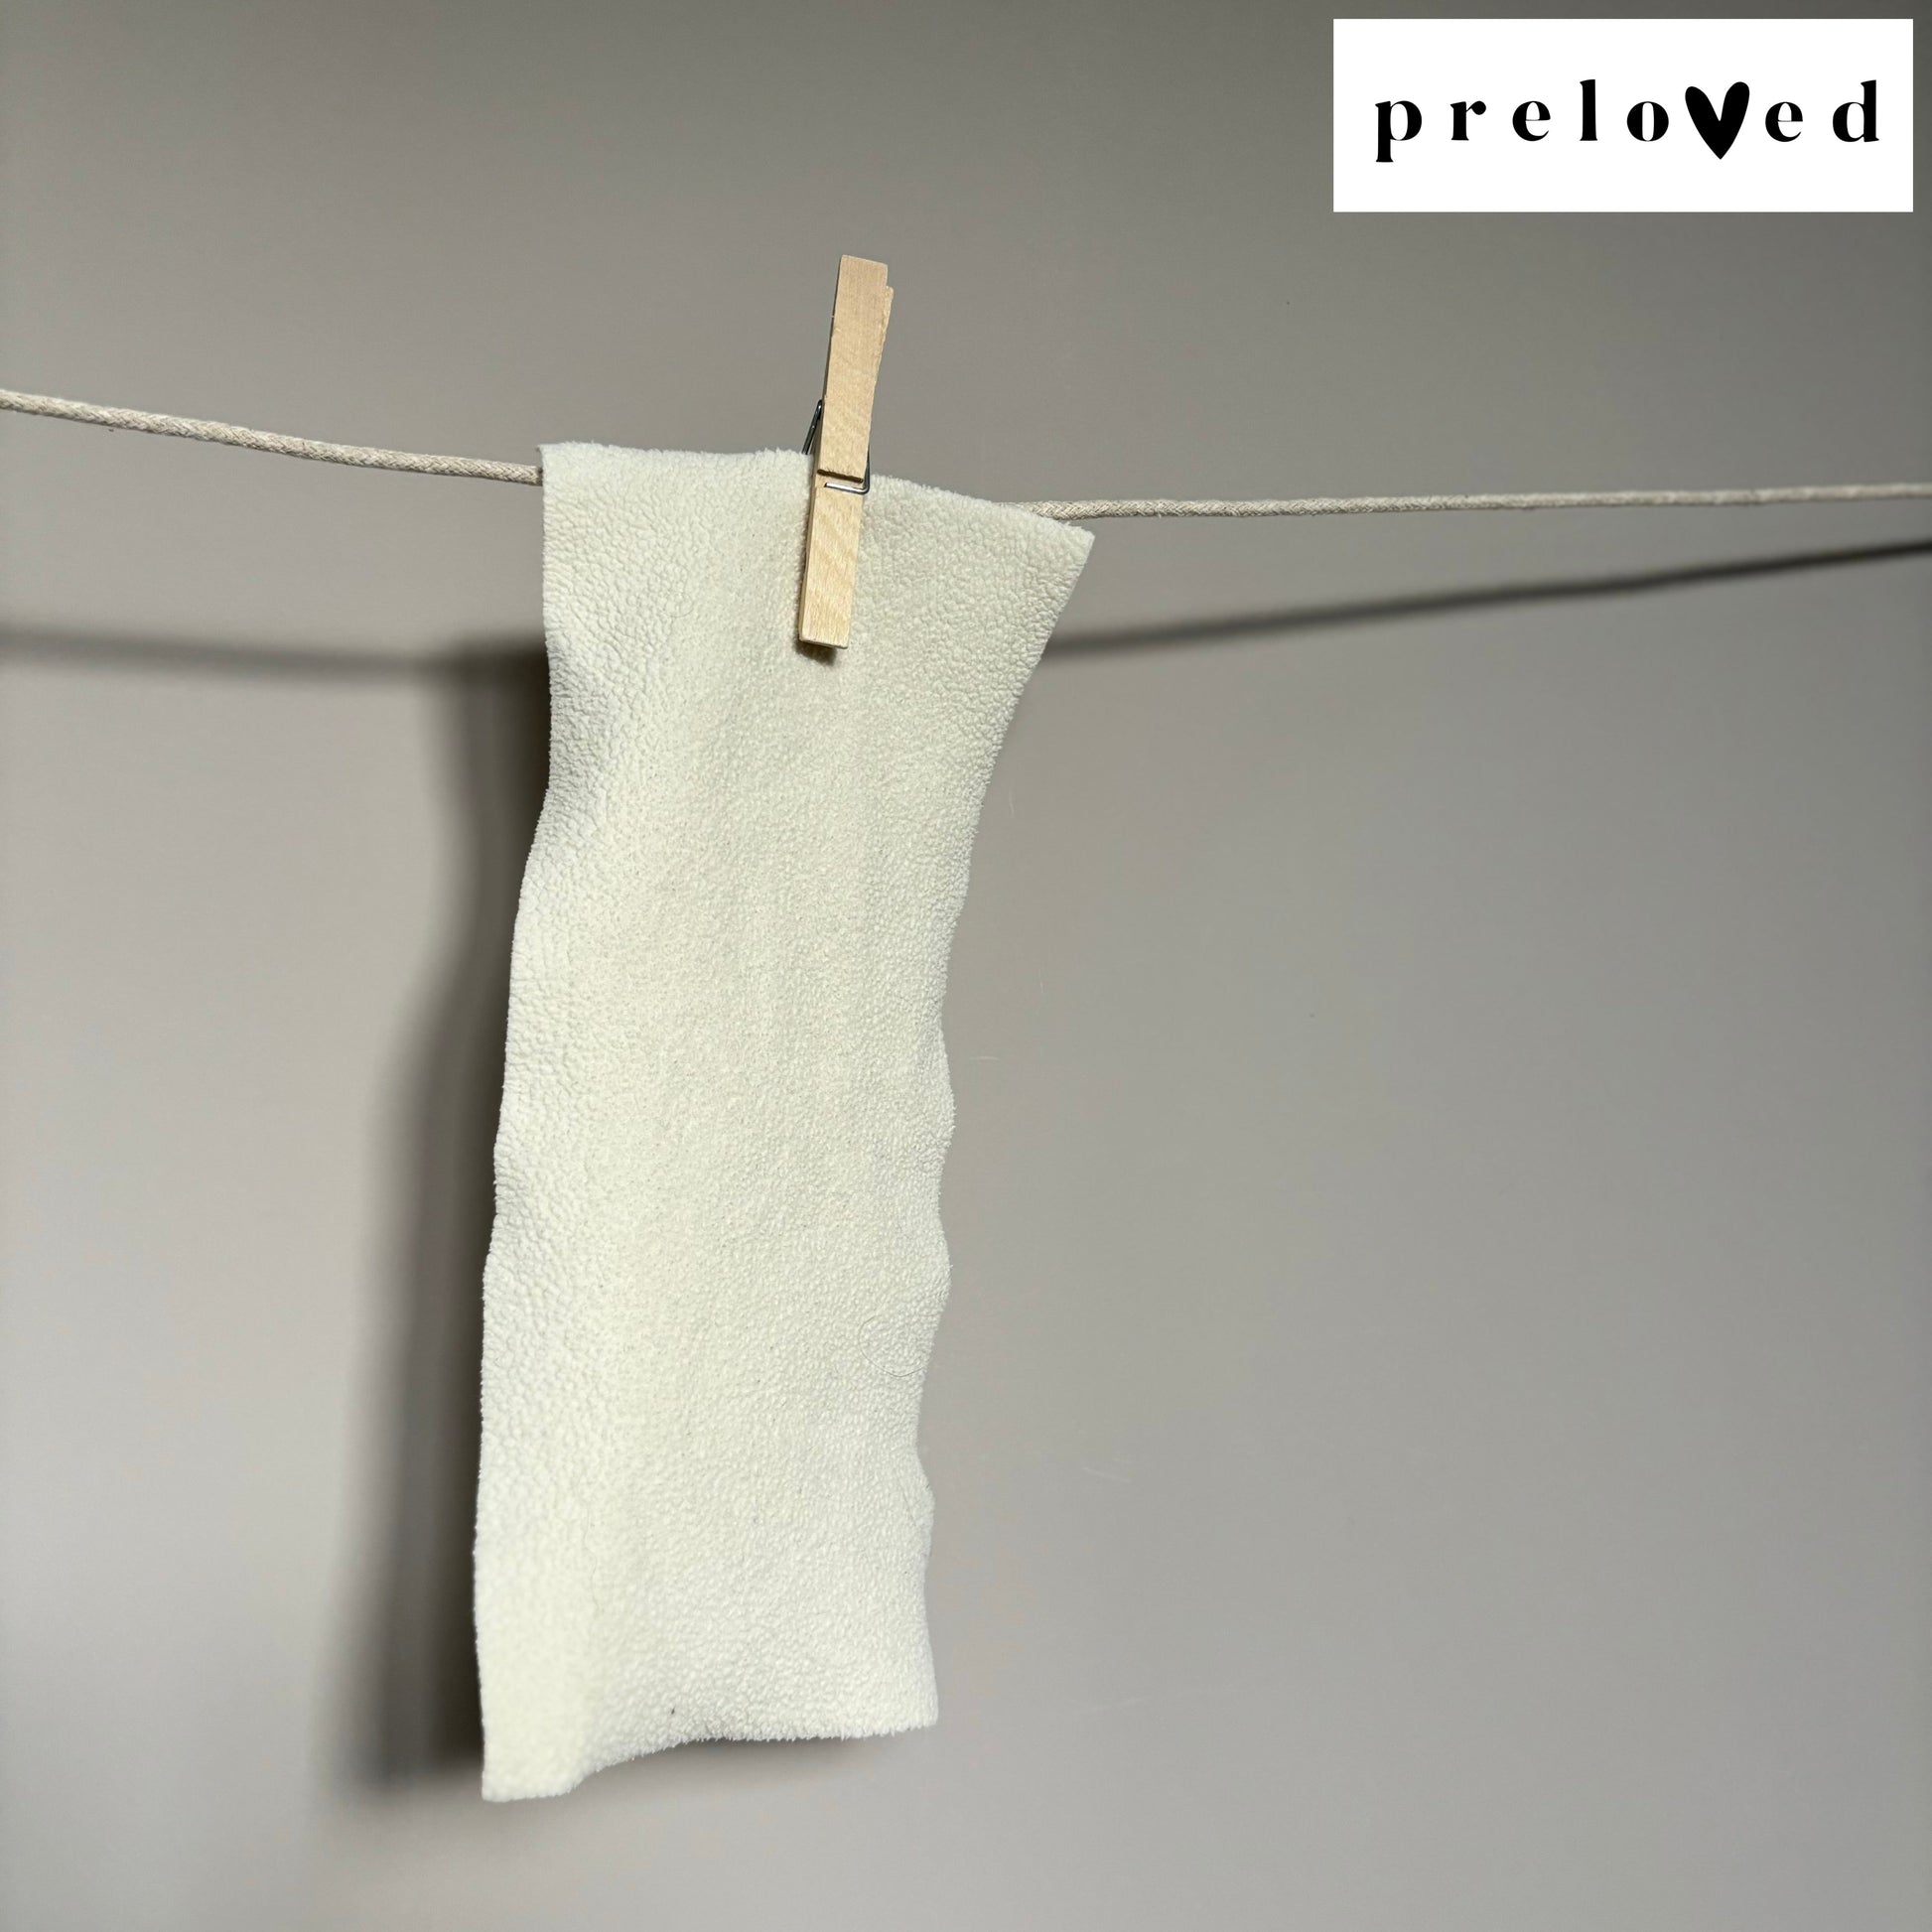 Fleece Nappy Liners-Accessories-Unbranded-Unbleached / Natural-The Nappy Market